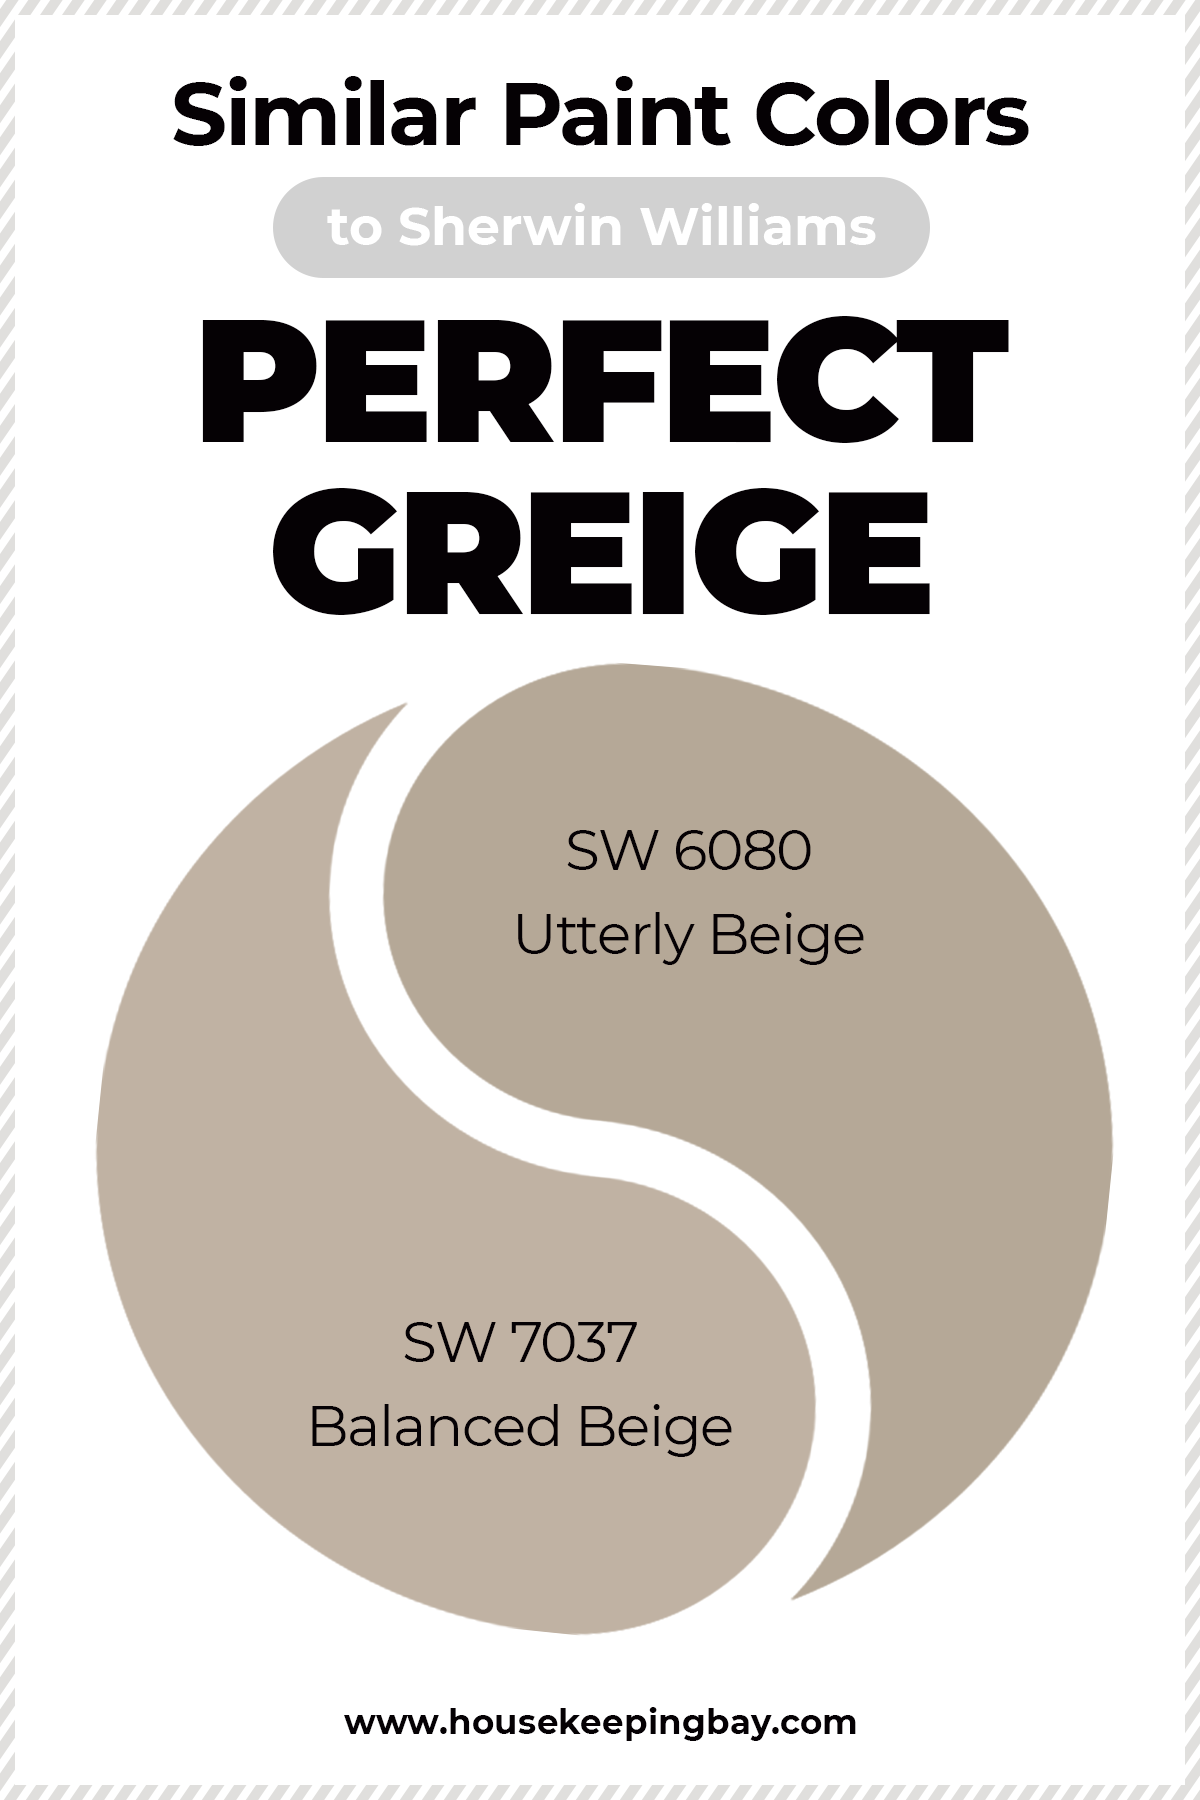 Similar Paint Colors to Sherwin Williams Perfect Greige